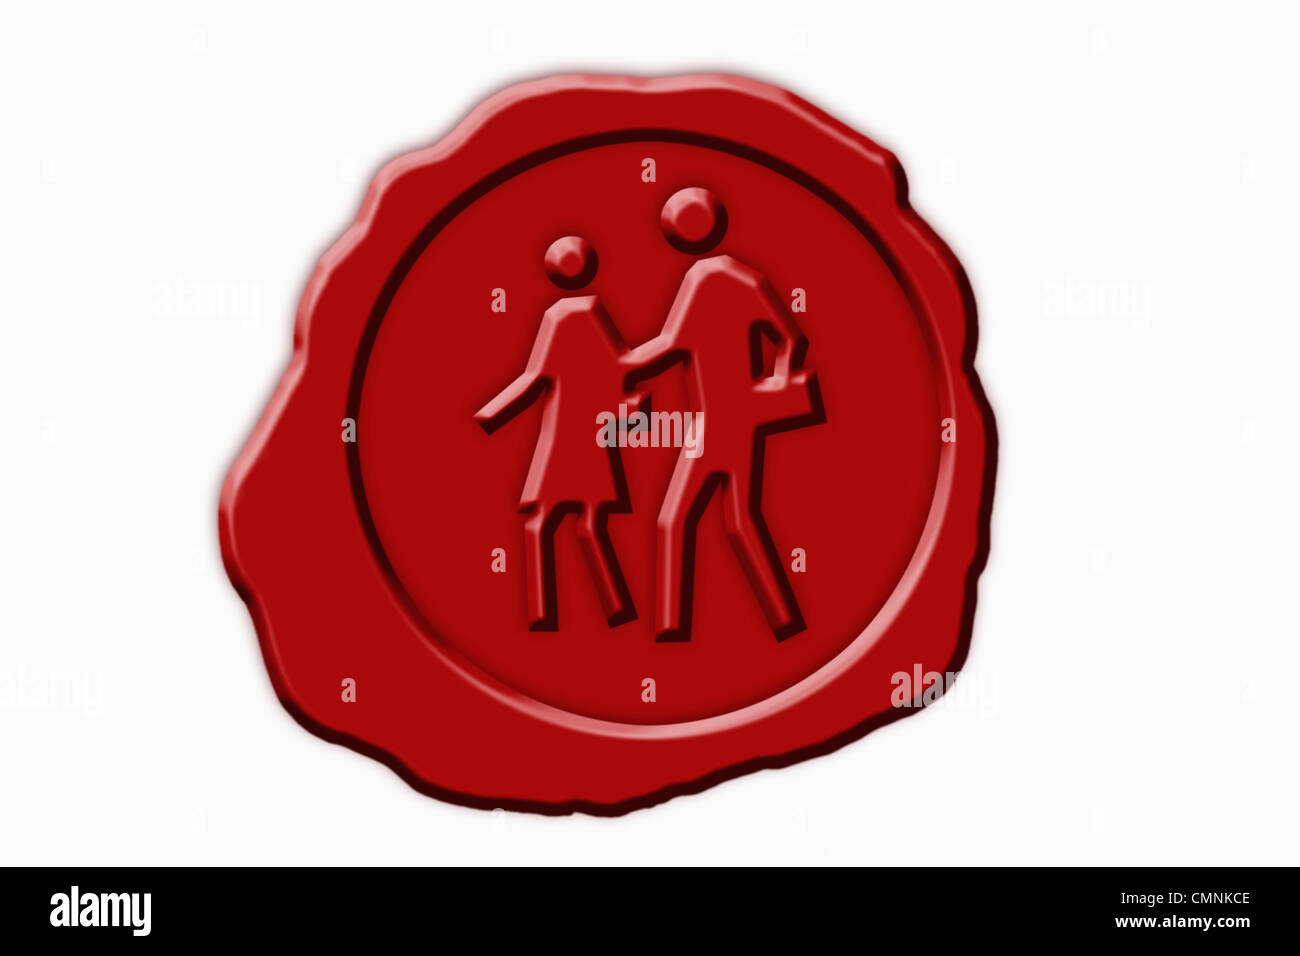 Detail photo of a red seal with a pedestrians Symbol in the middle, background white. Stock Photo